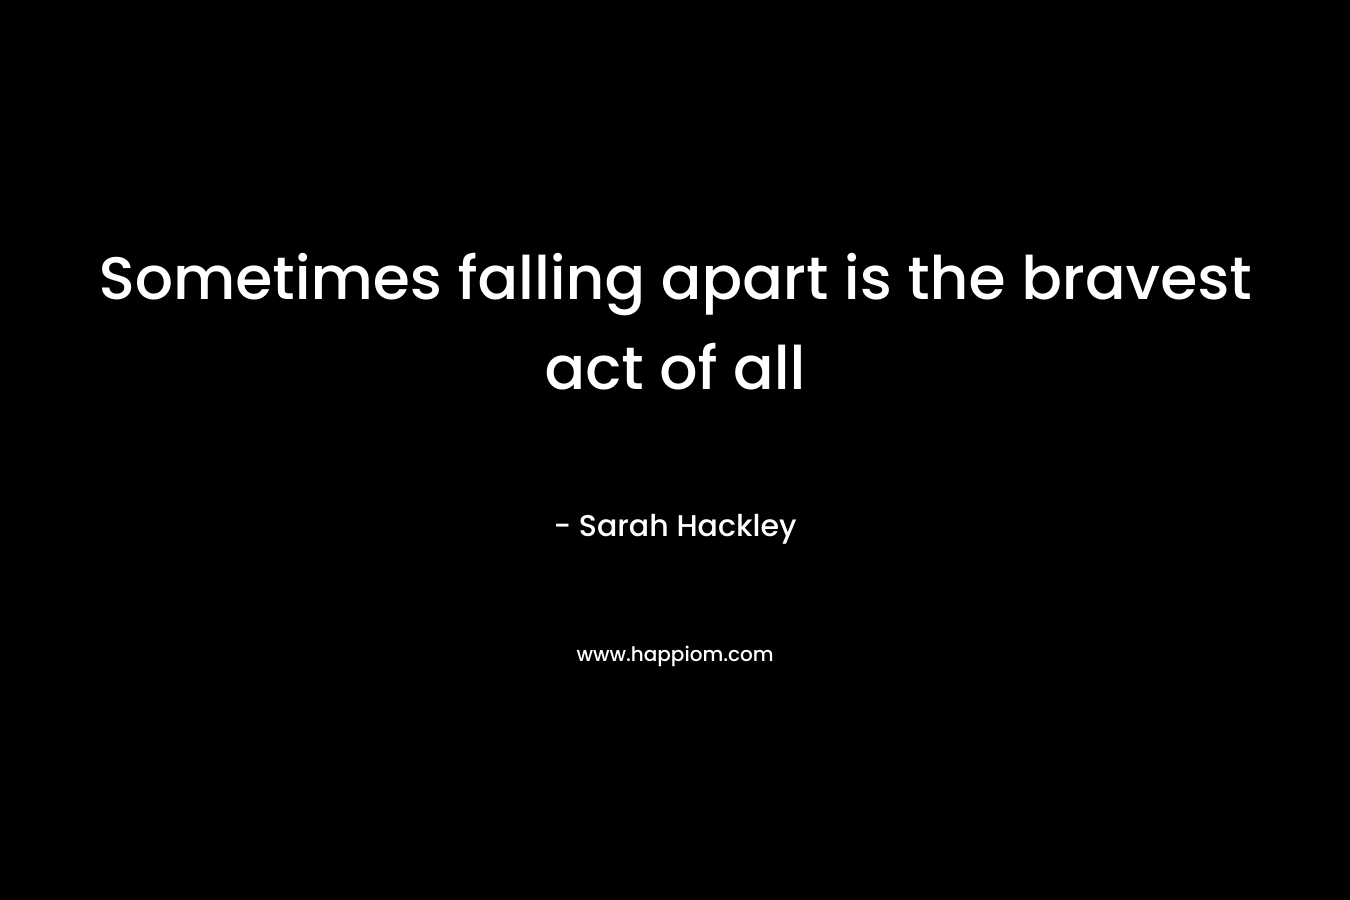 Sometimes falling apart is the bravest act of all